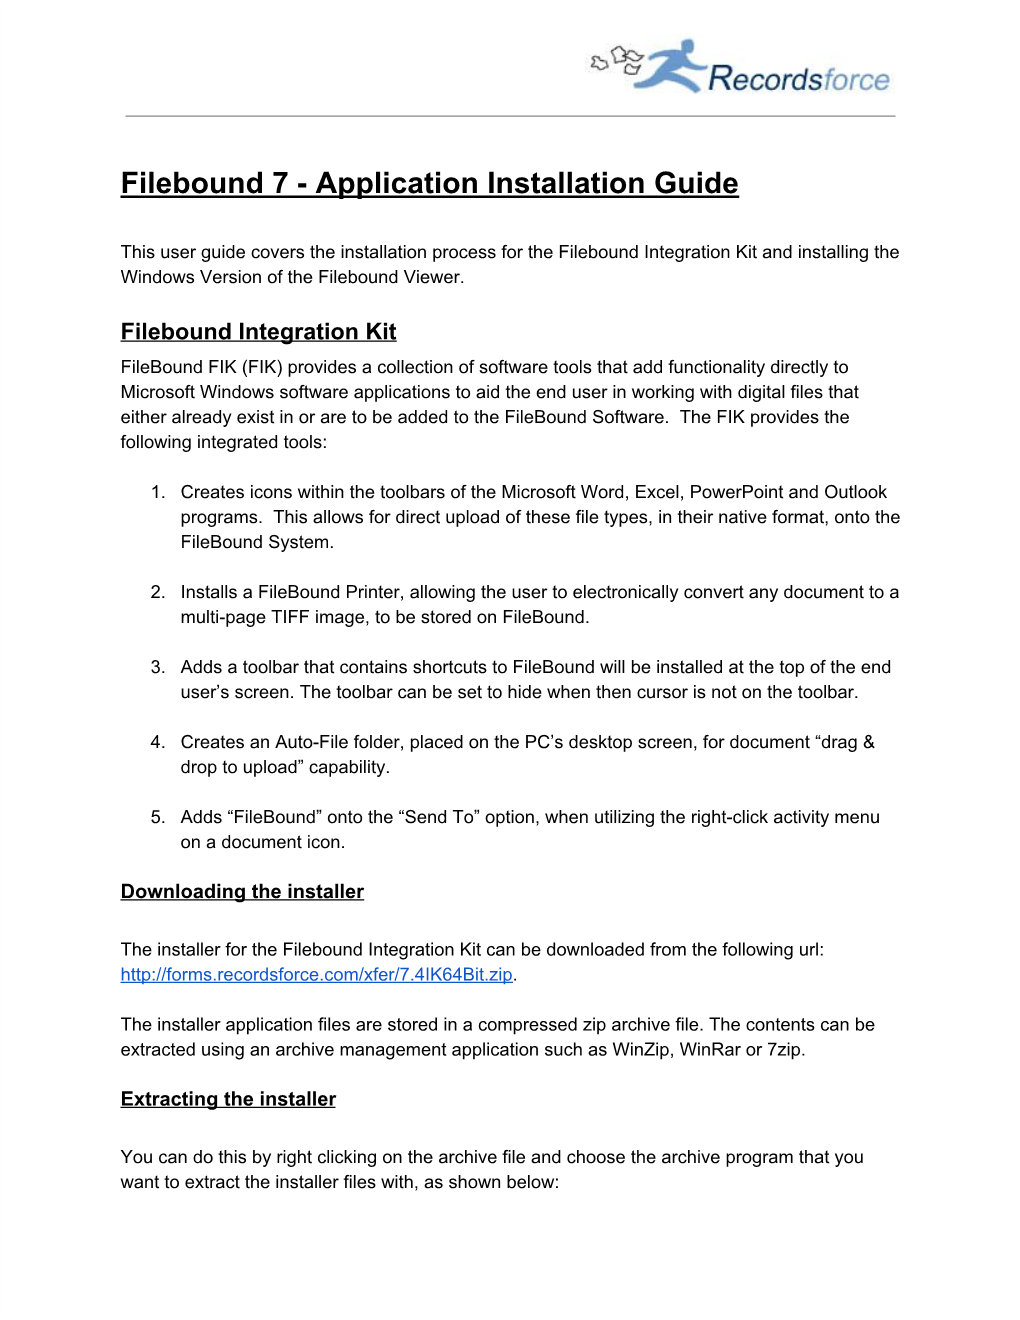 Filebound Integration Kit and Viewer Installation Guide